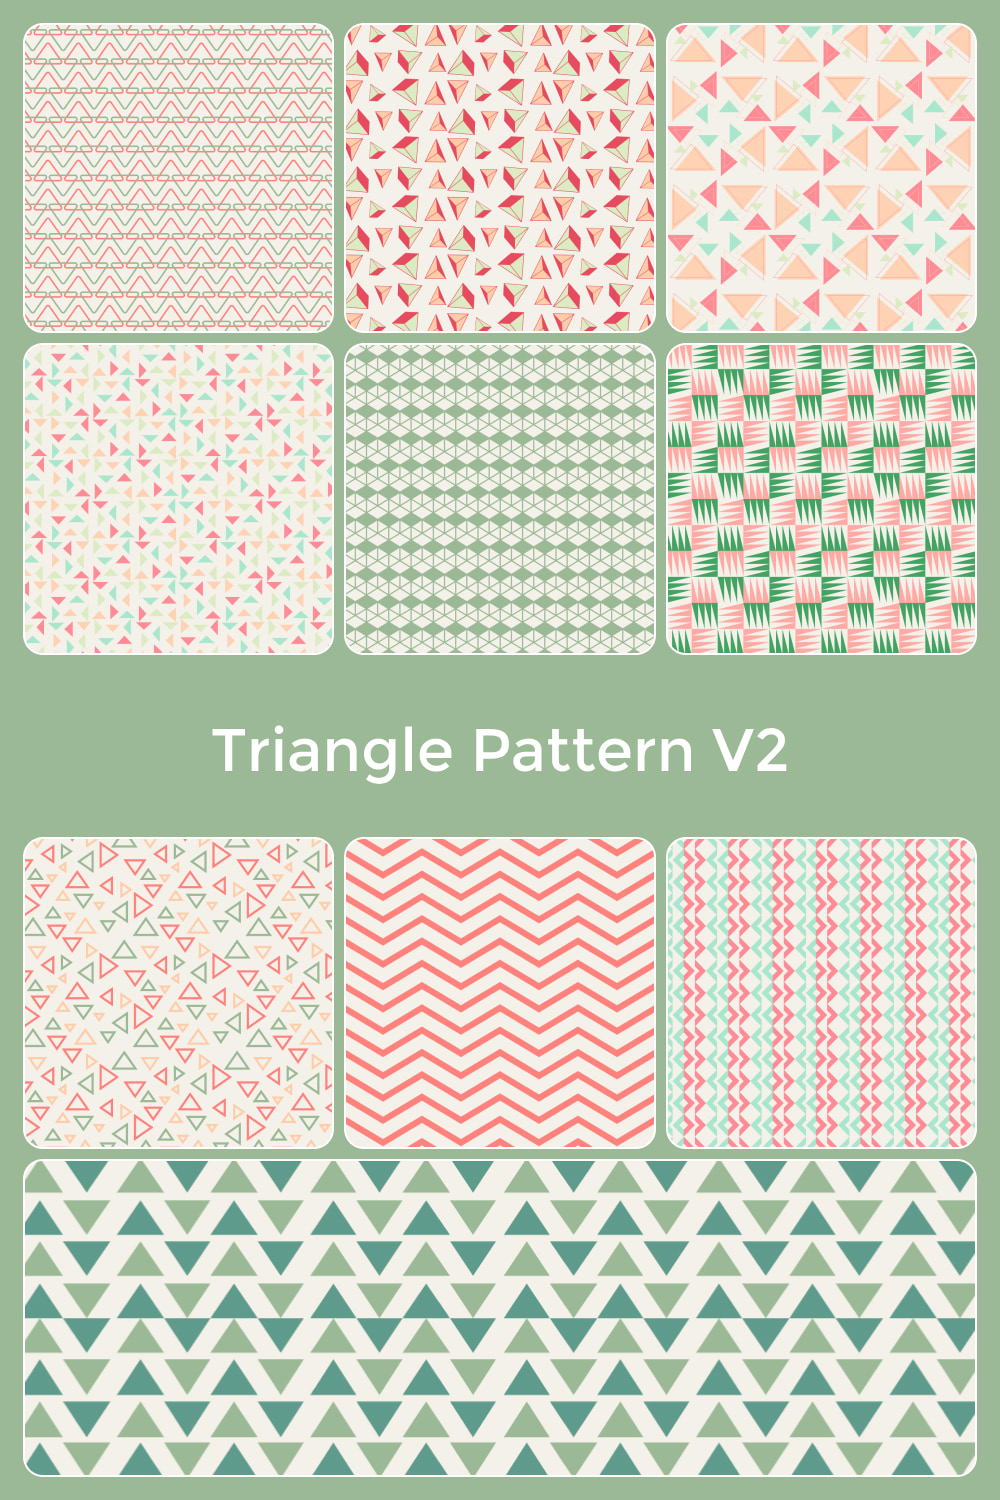 Green and pink triangle patterns for the interesting purposes.